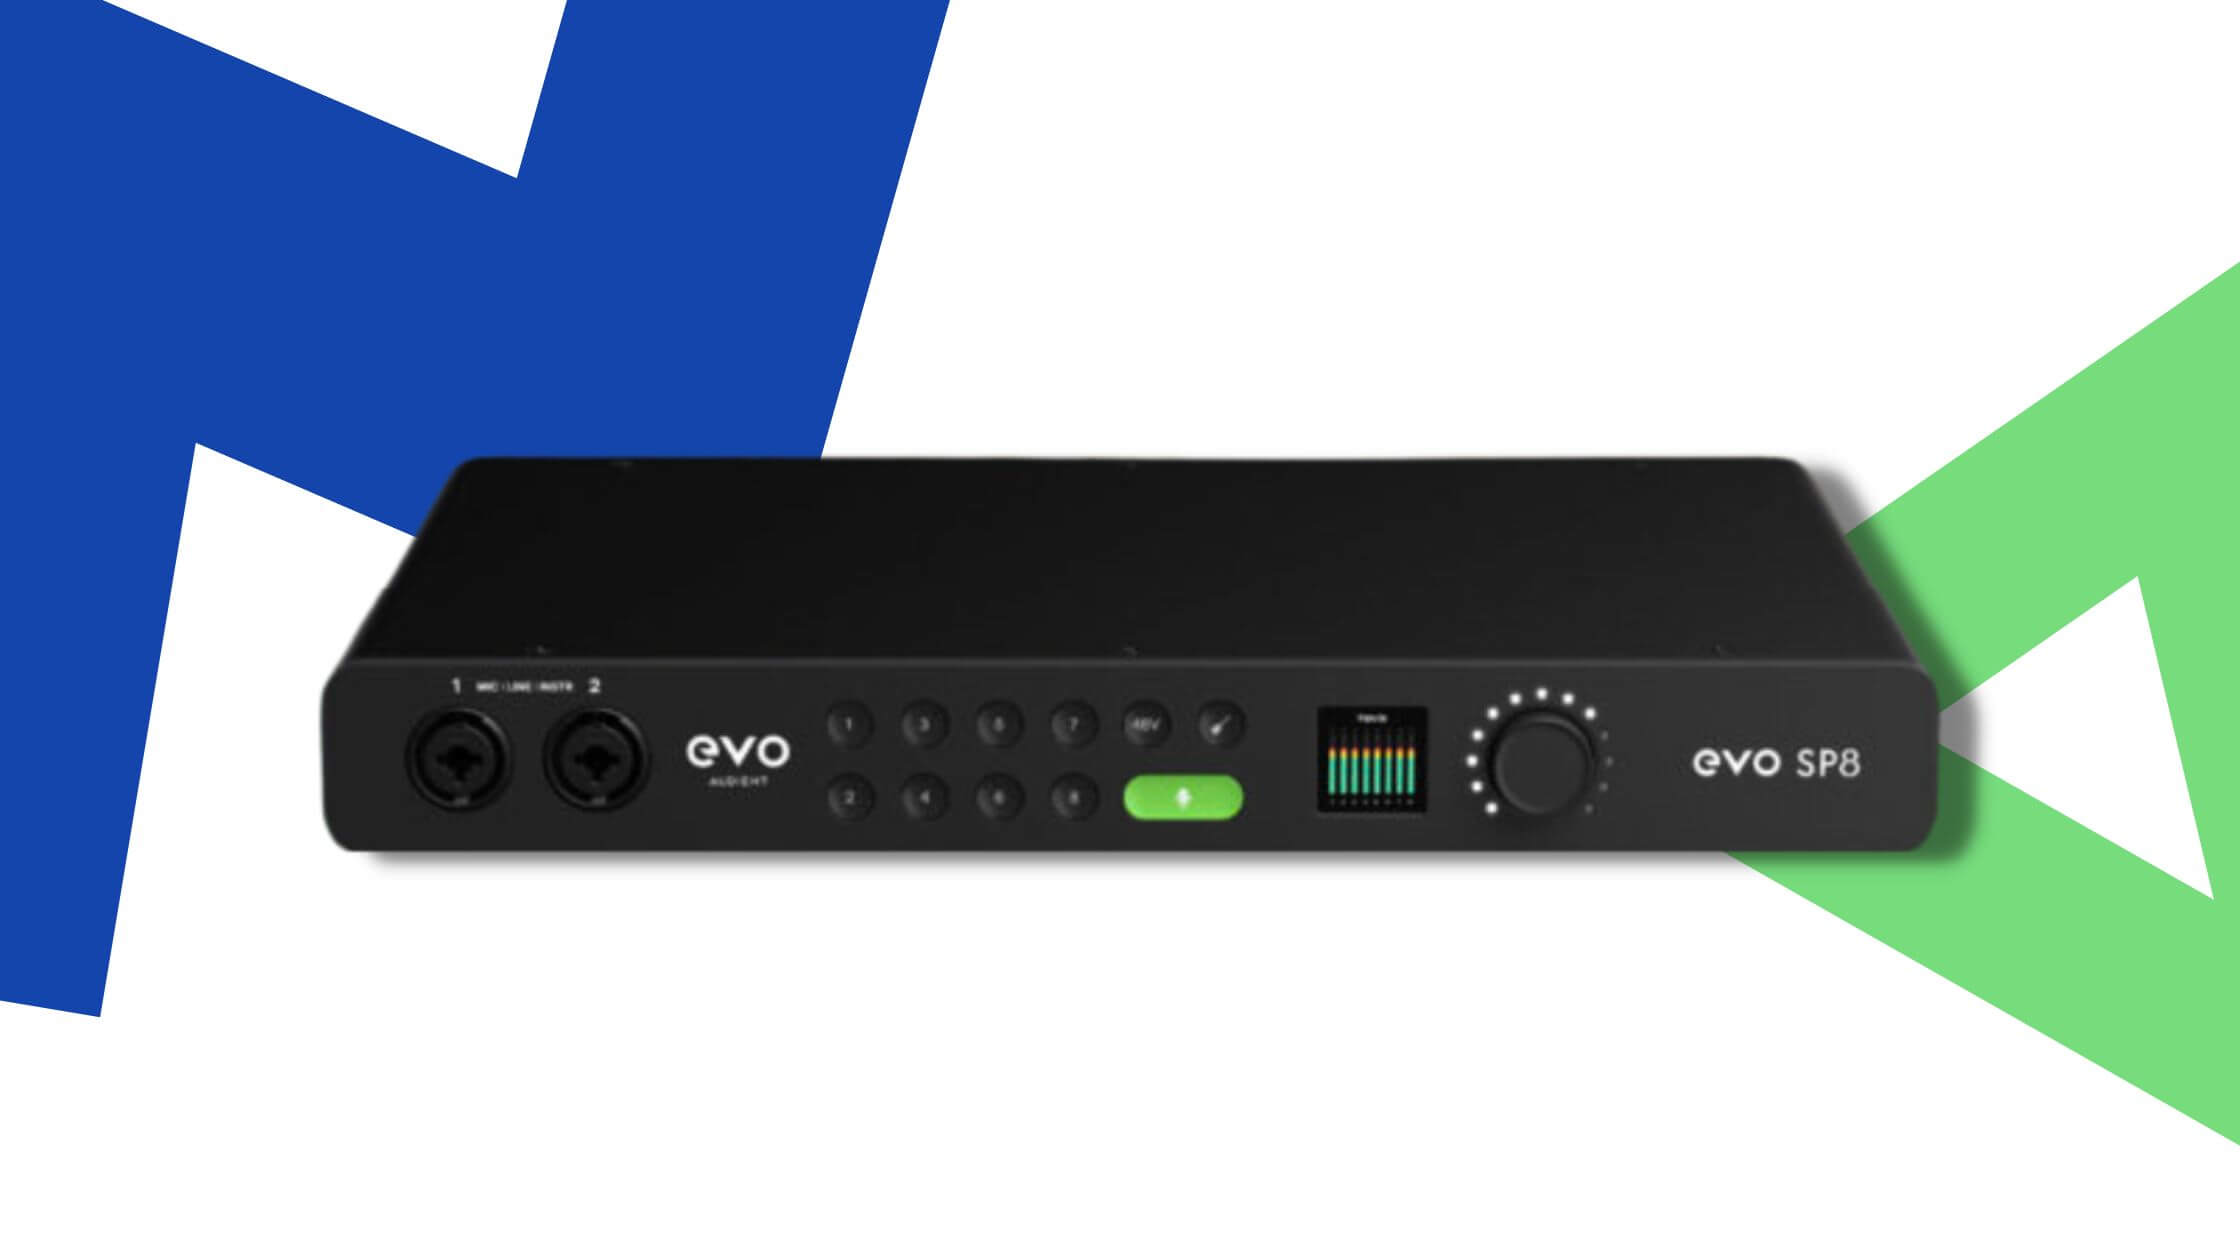 Upgrade your recording setup with Audient’s EVO SP8 8-channel preamp expander with smart features